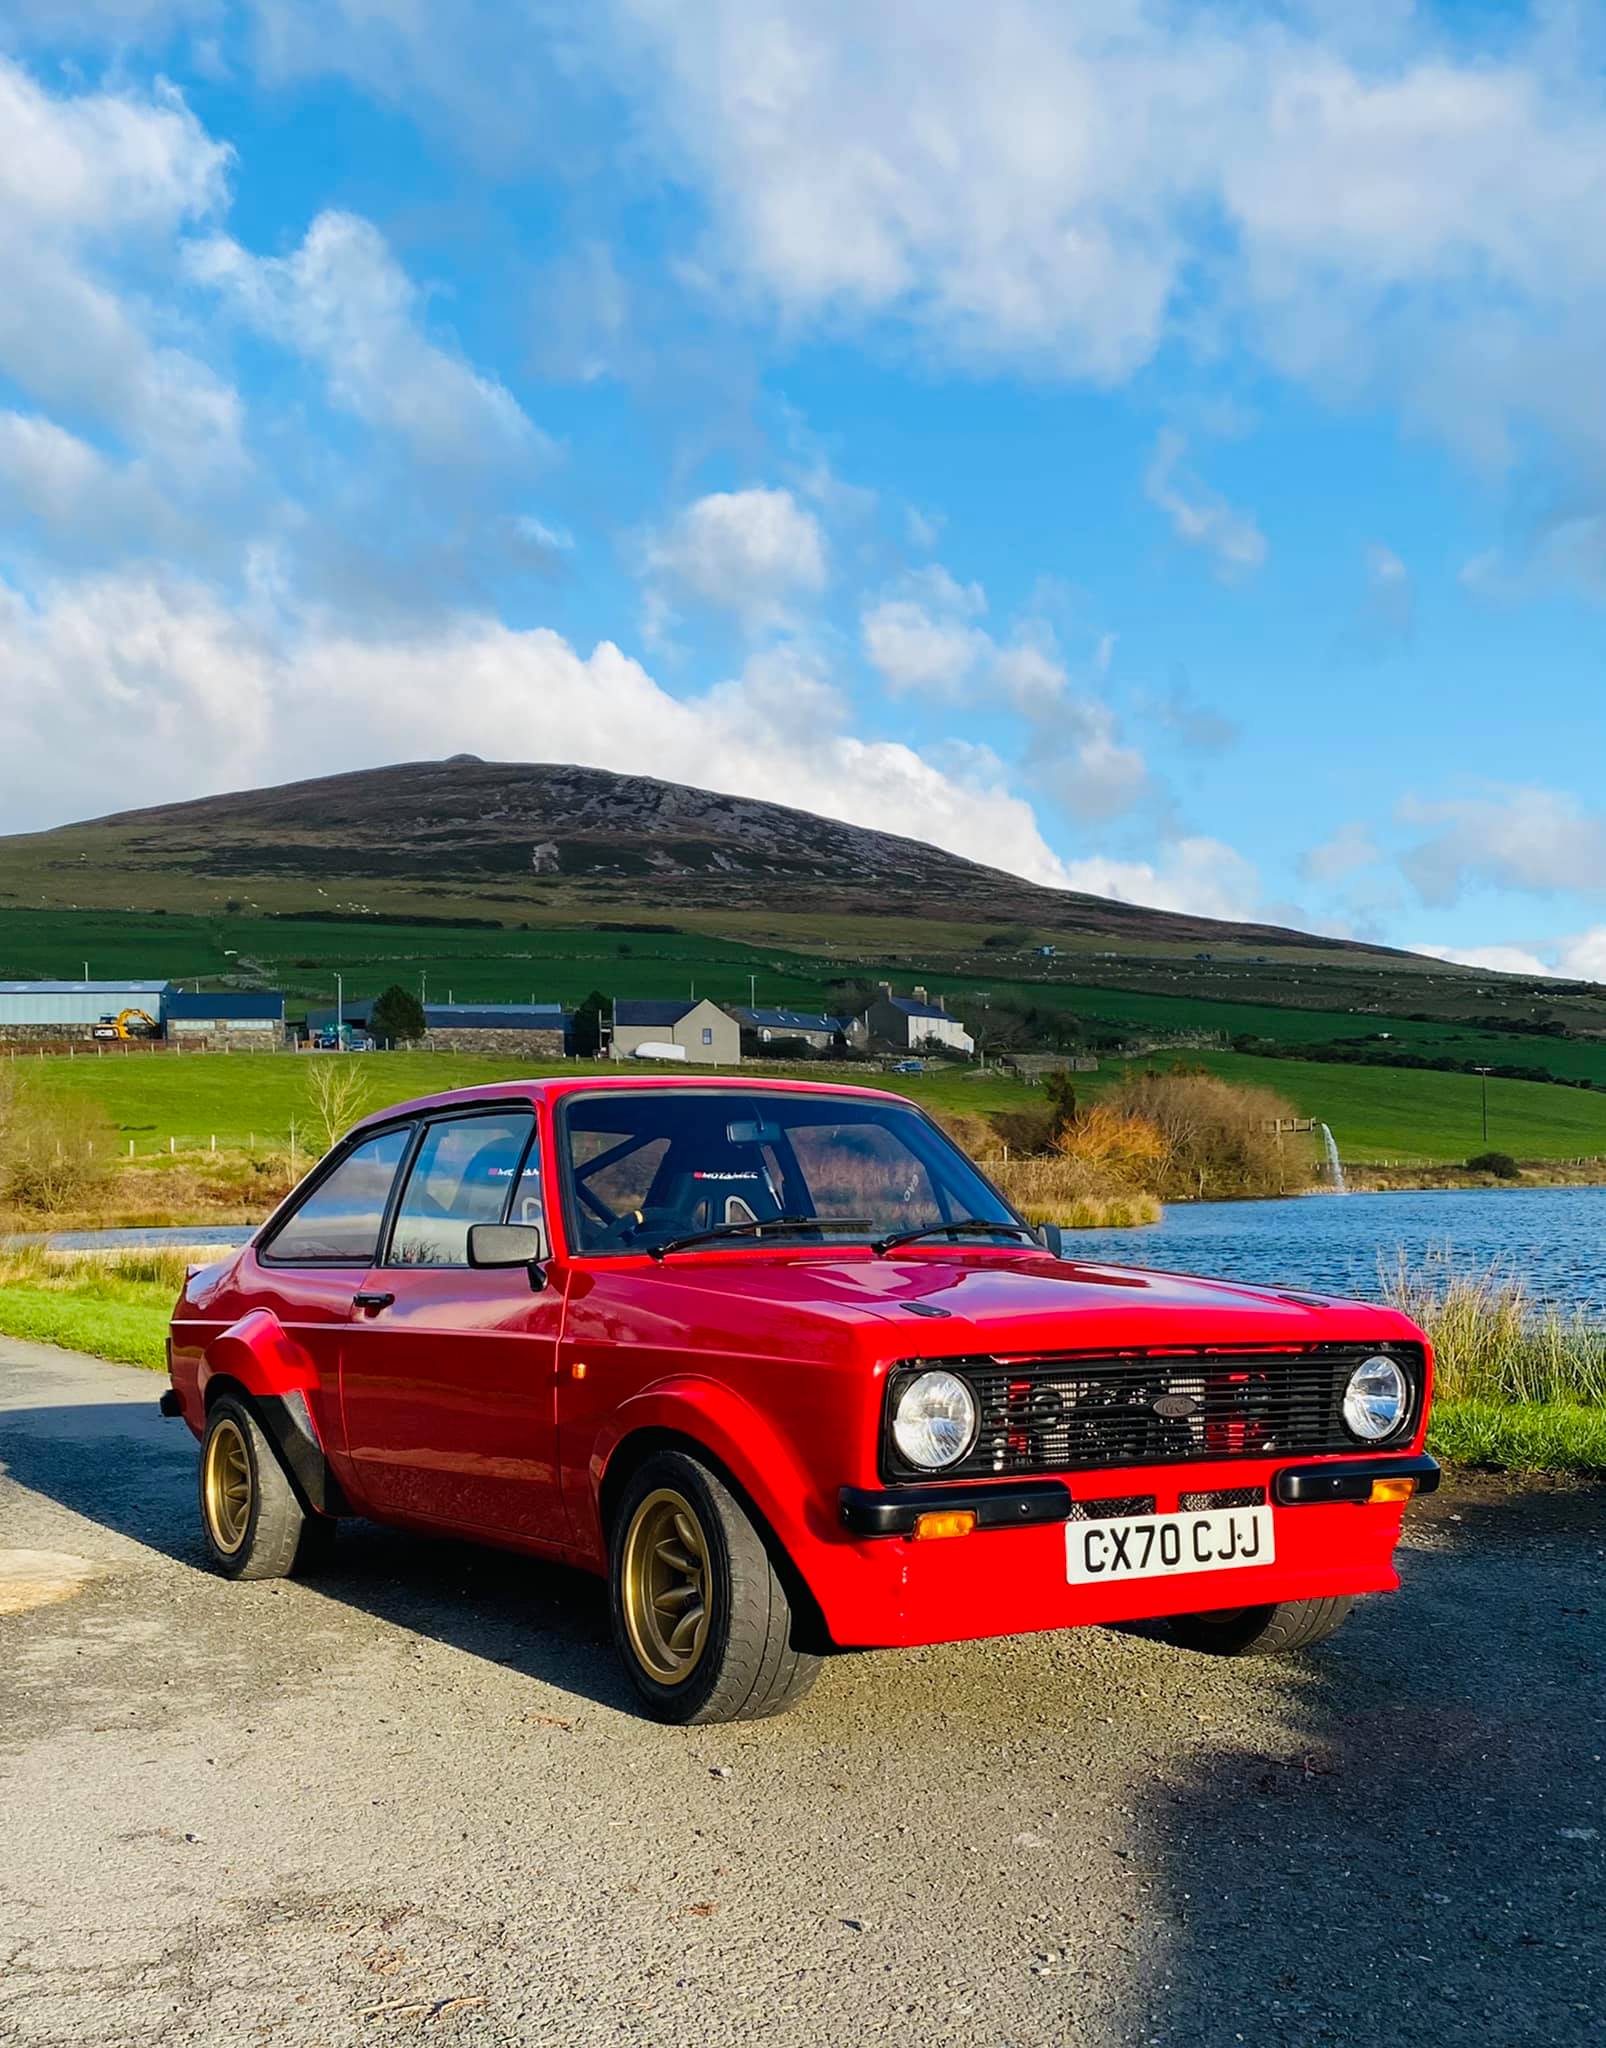 Brand-New 2021 Ford Escort Mk2 Begs to Be Driven Hard - autoevolution